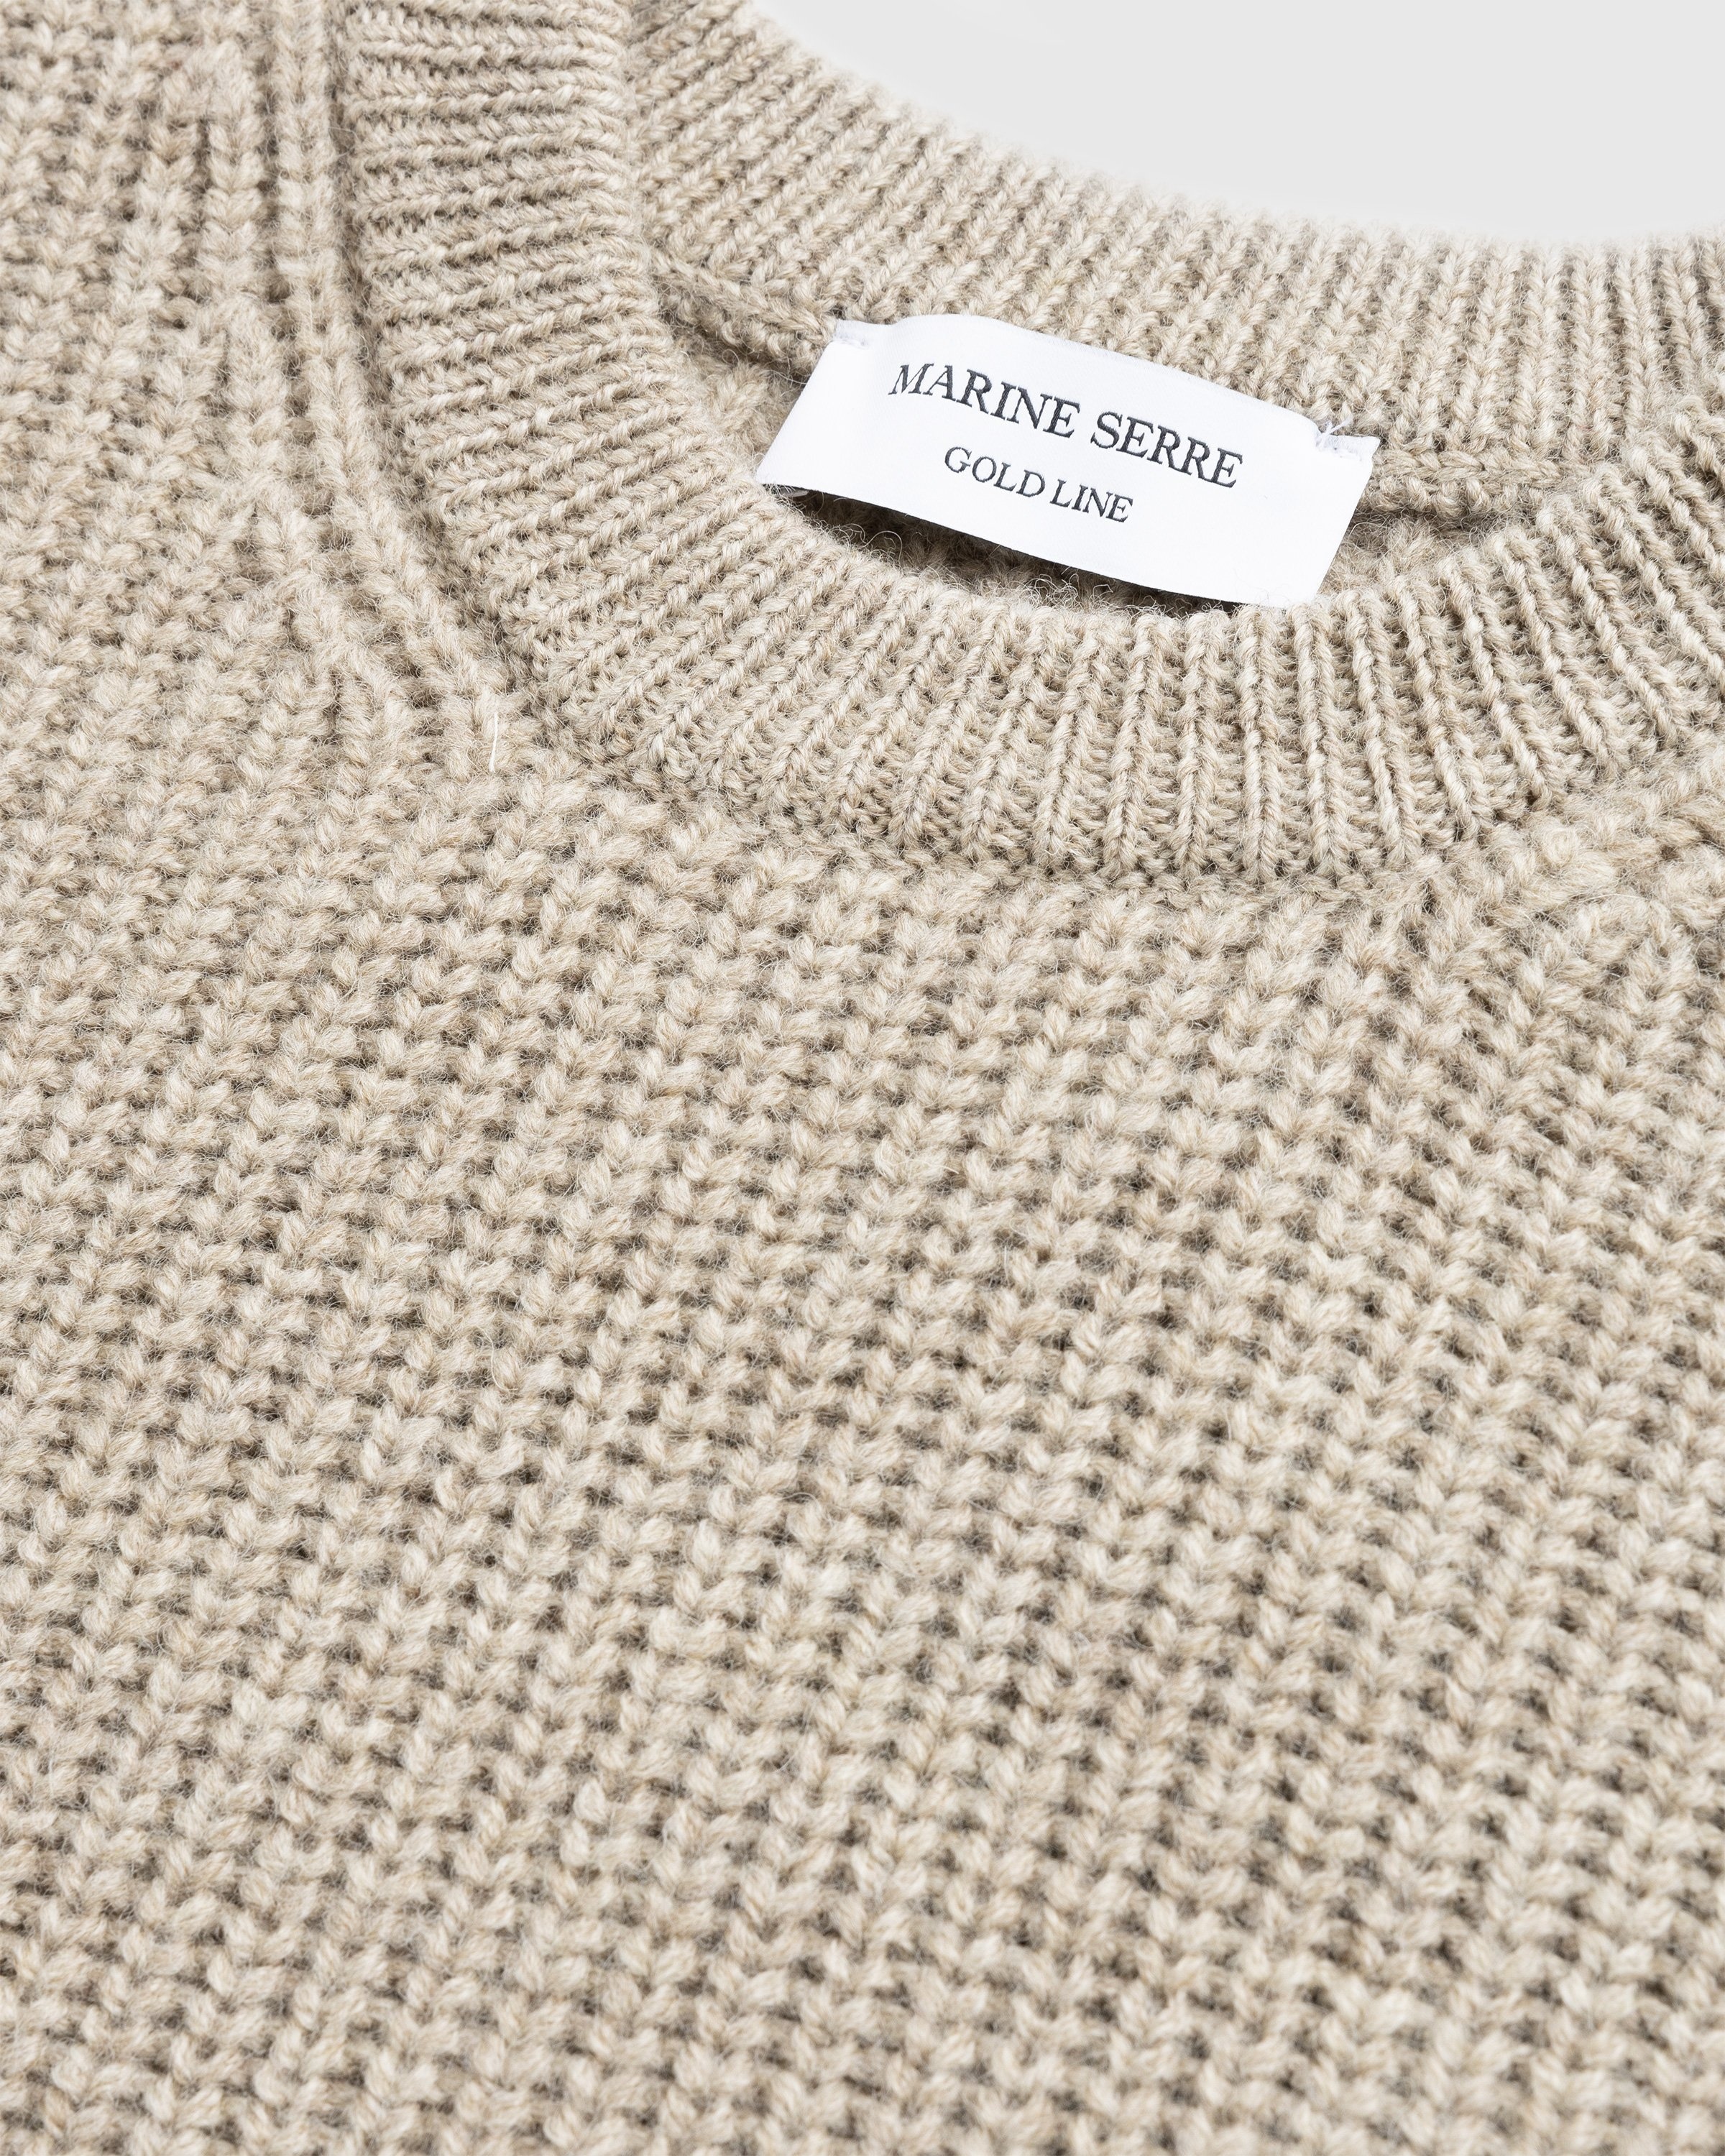 Marine Serre – Wool and Fluffy Knit Crewneck Pullover Beige